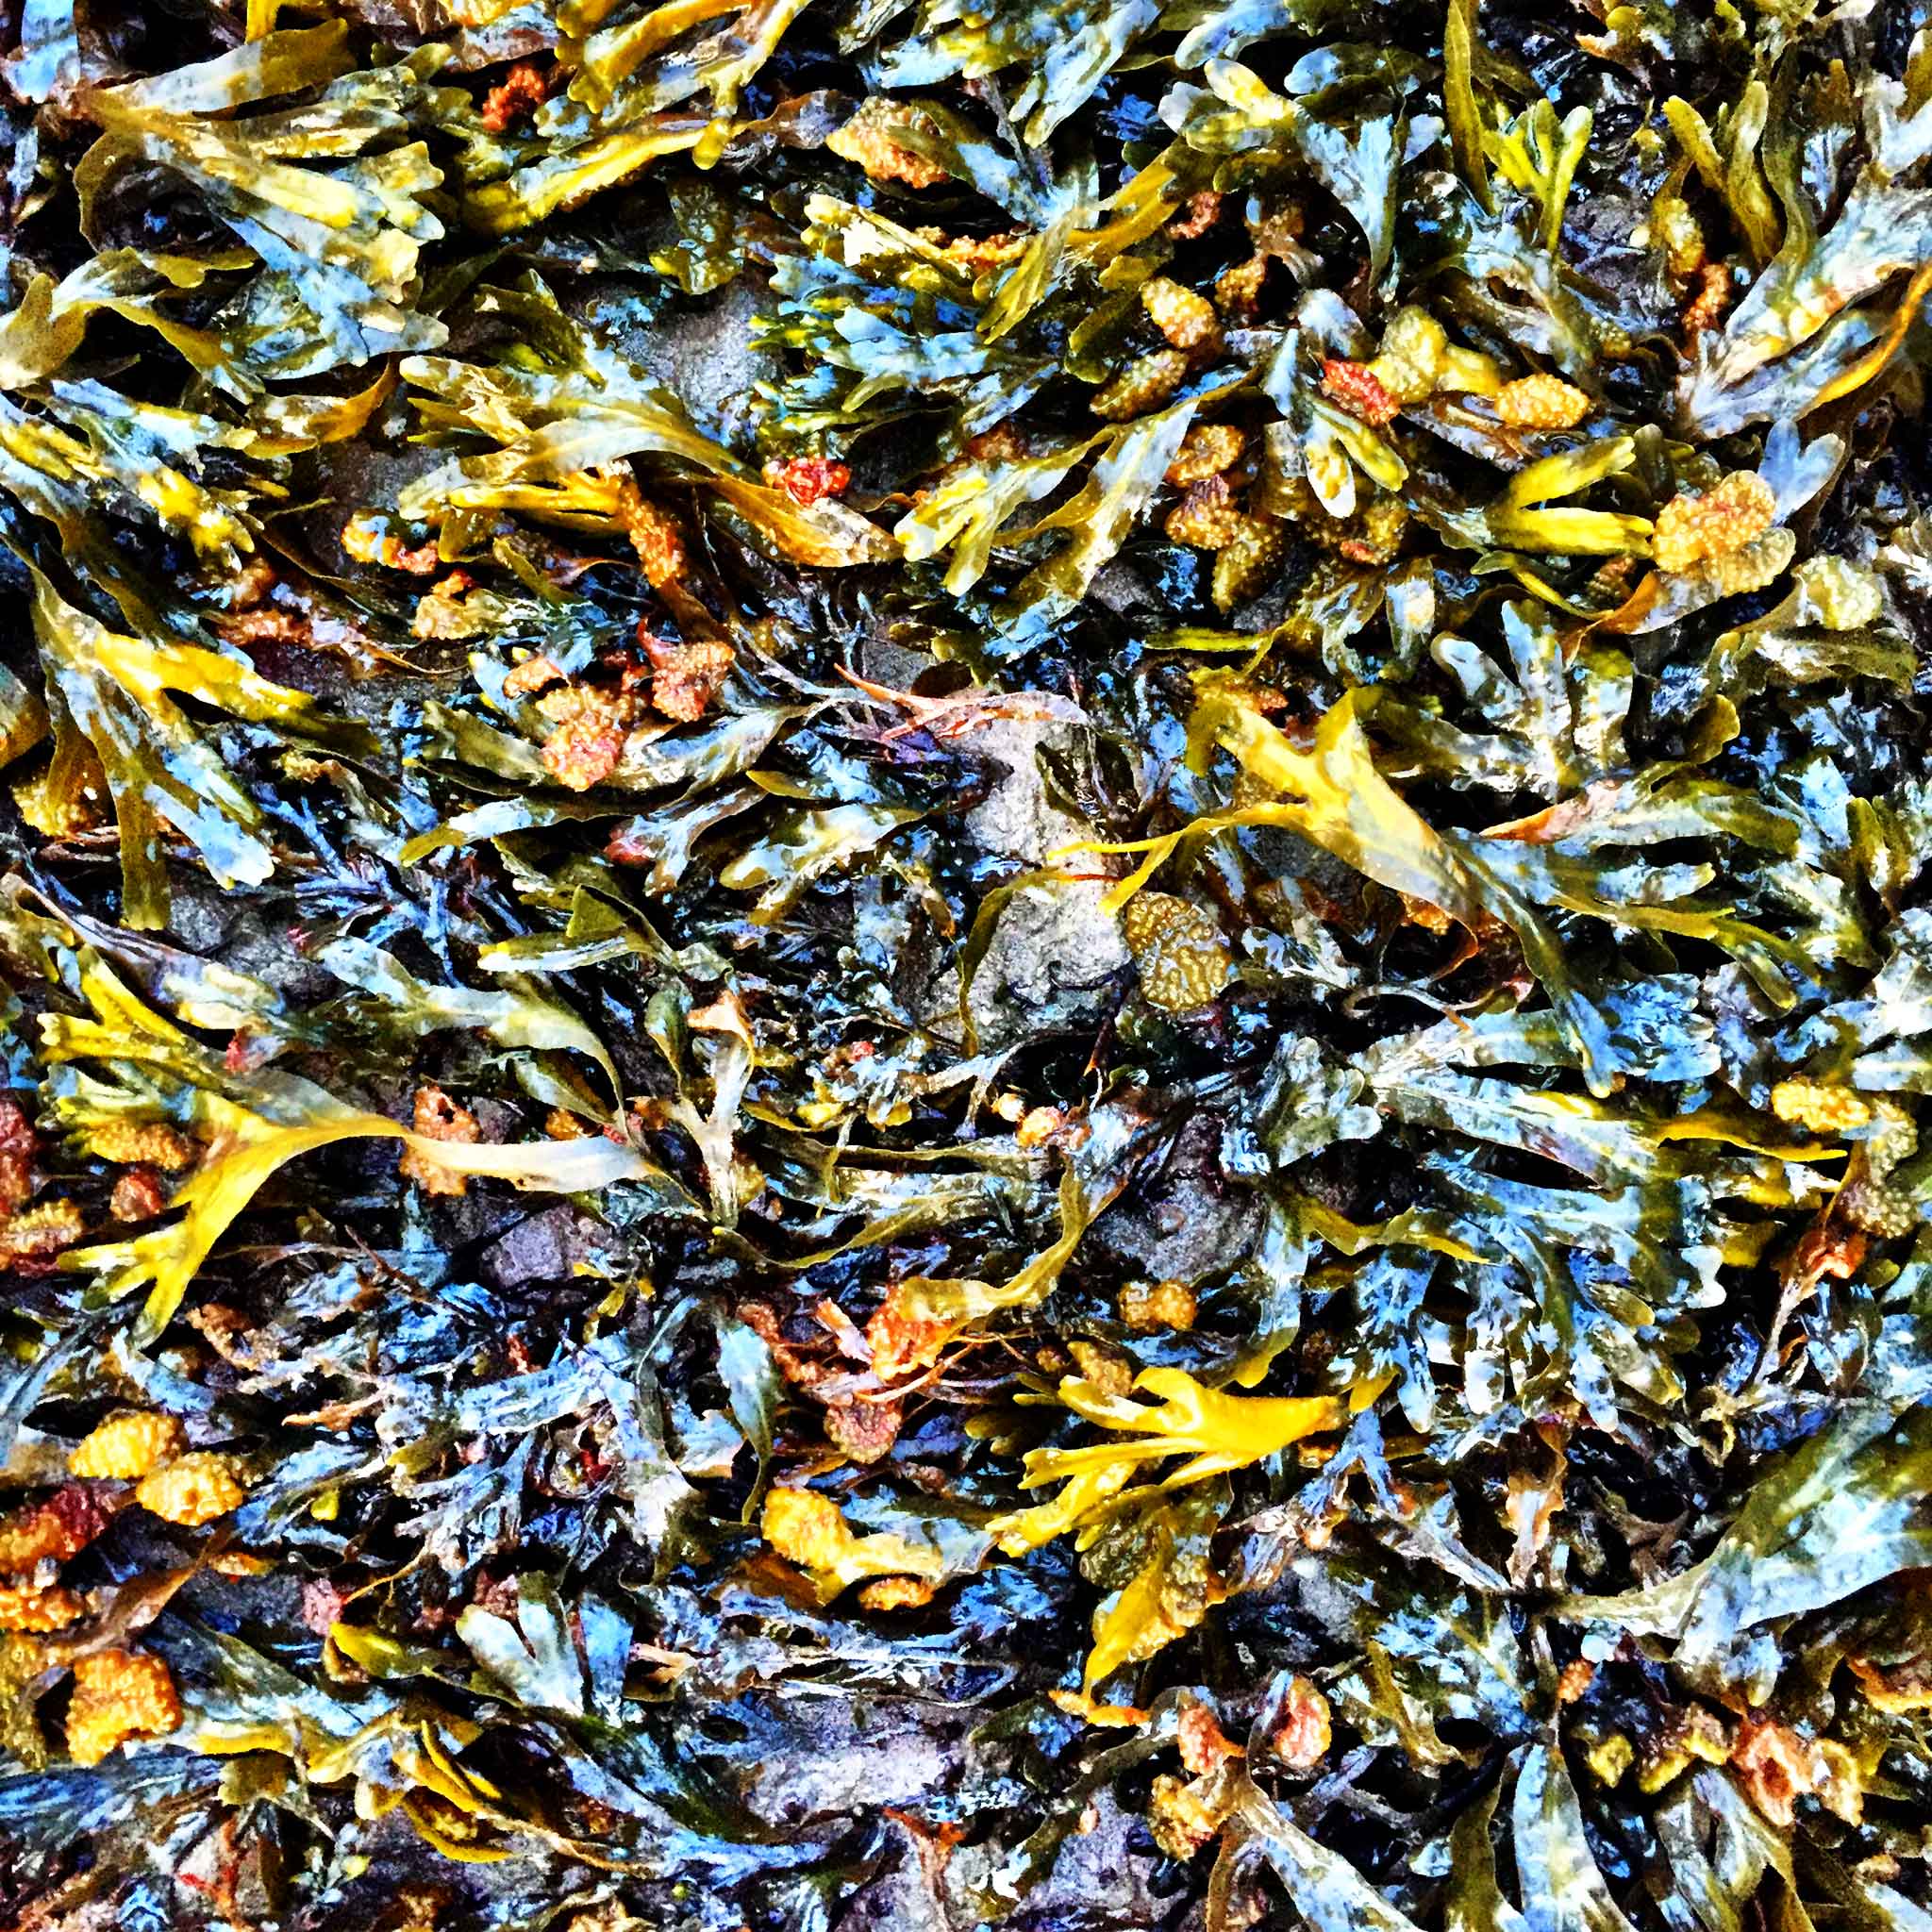 Colour enhanced photograph of seaweed in the tidal zone of the Petitcodiac River on the Bay of Fundy. | Image by The Ruggist.